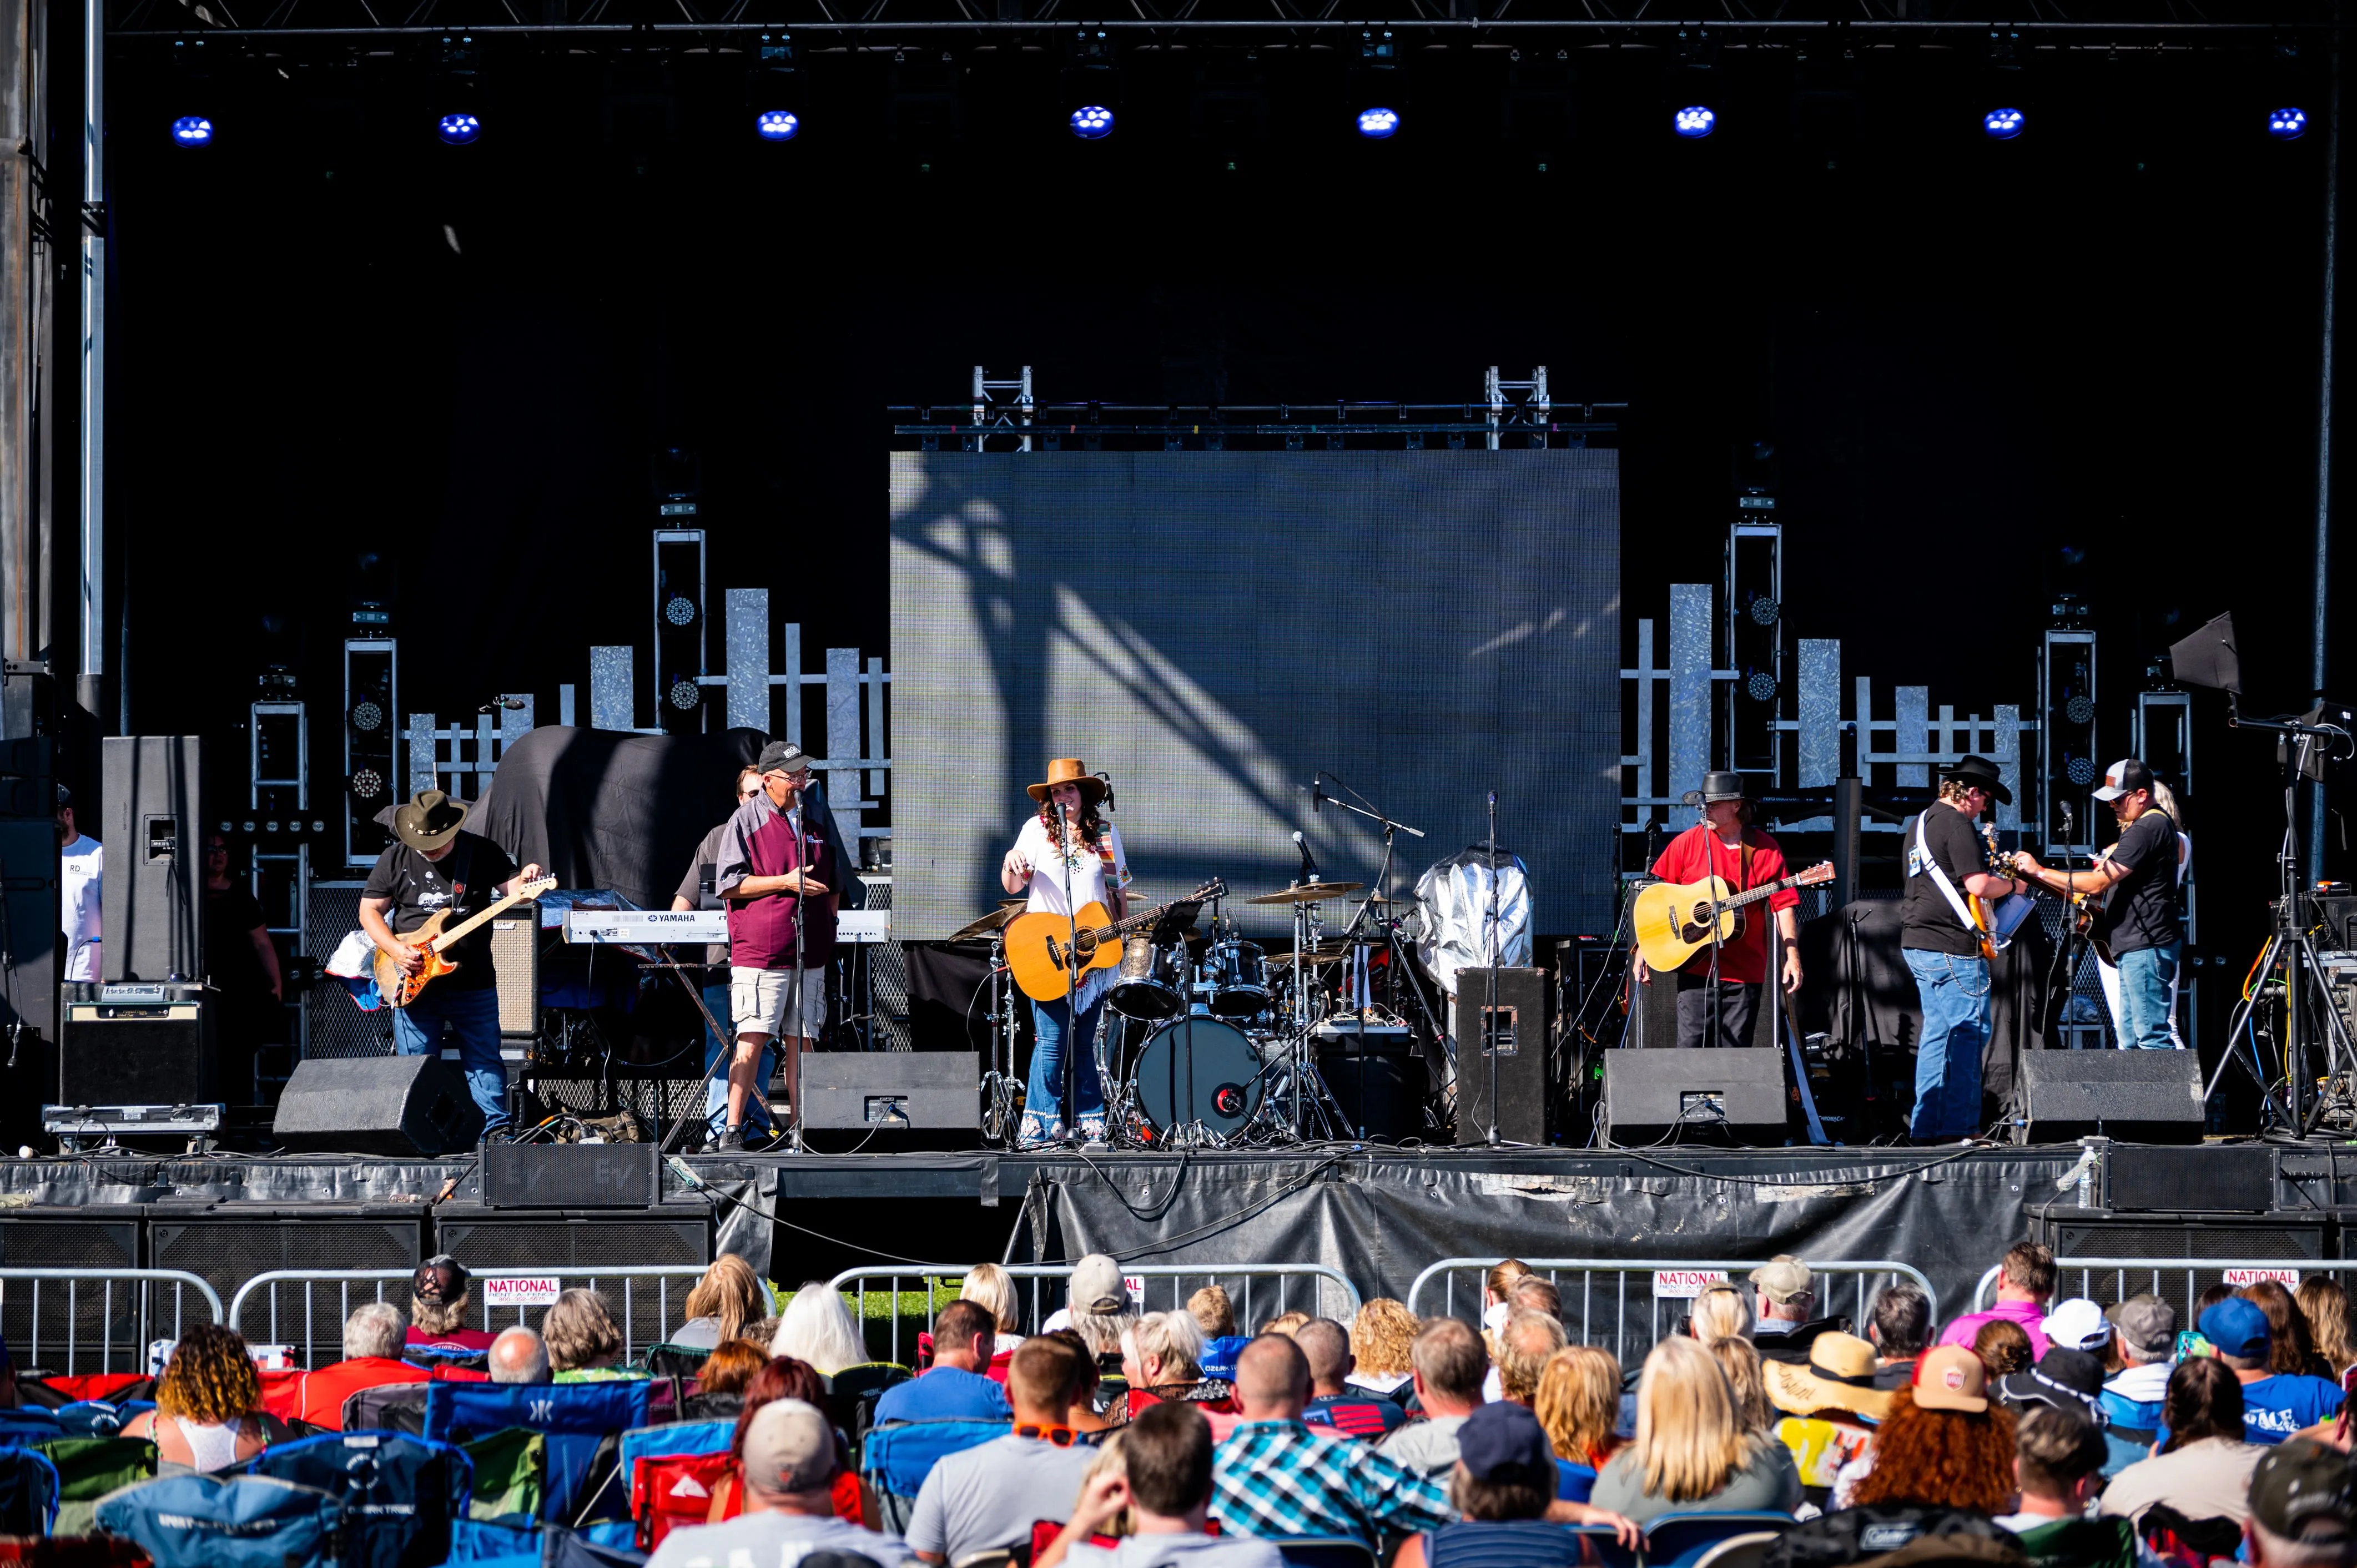 Band performing on an outdoor stage at a concert with an audience in the foreground sitting on folding chairs.